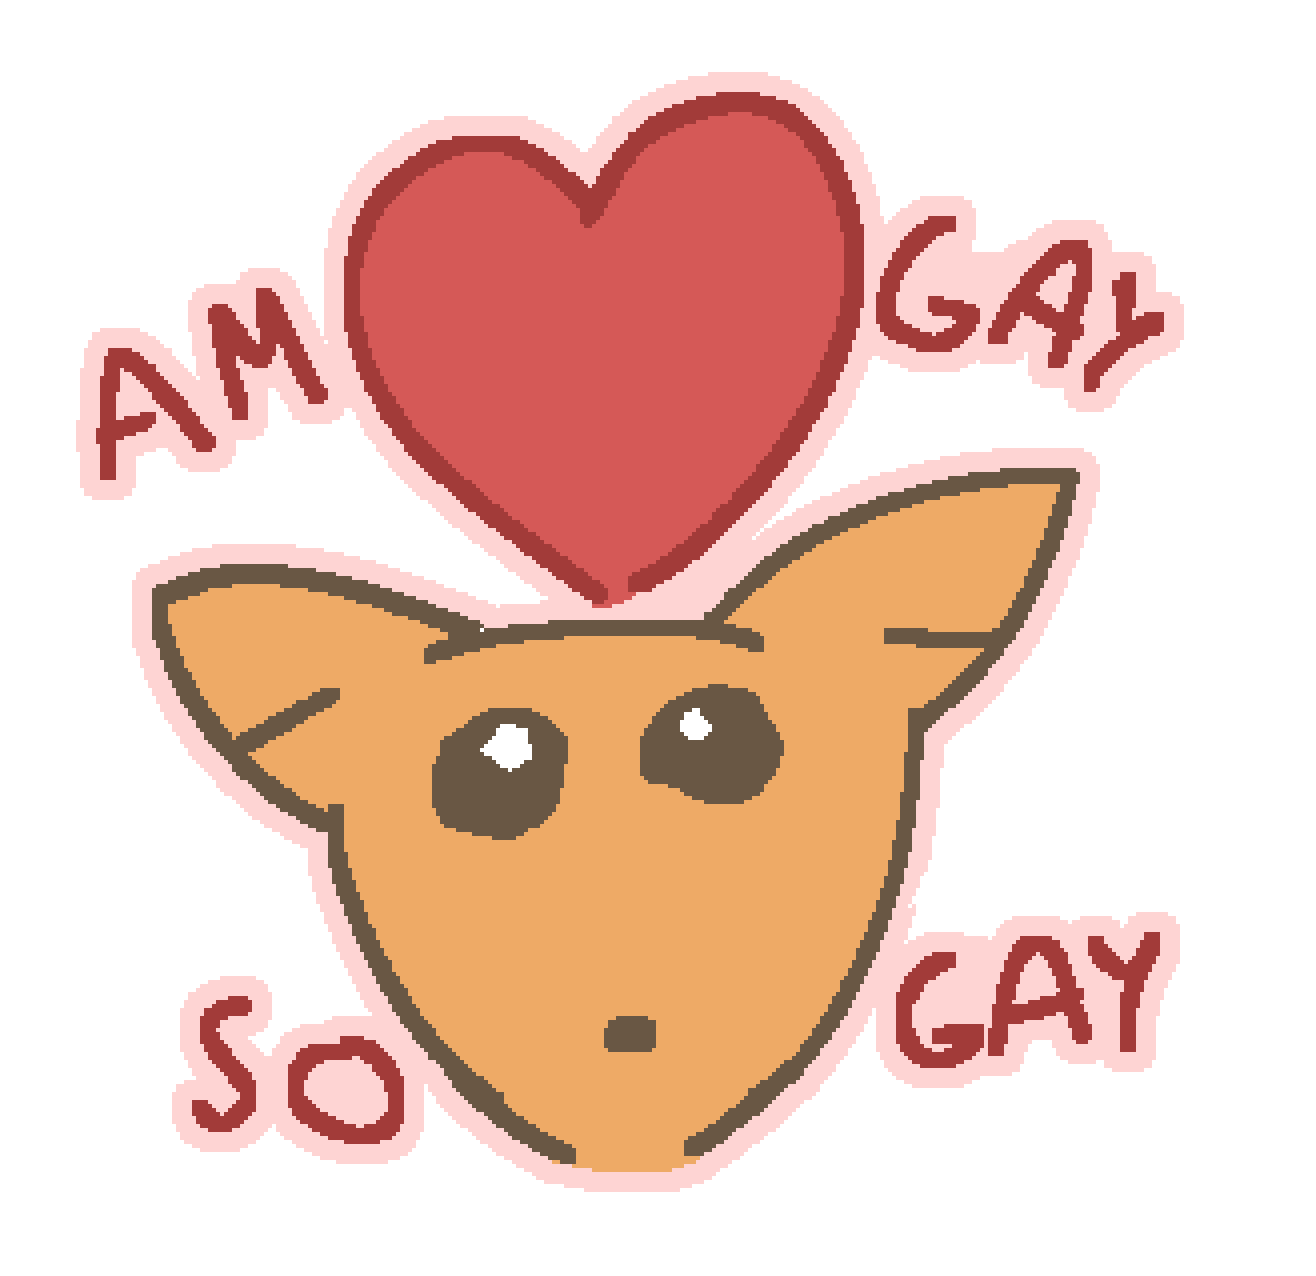 a fox looking lovingly up at a heart above them, text reads "Am Gay, So Gay"Aug 05 2022